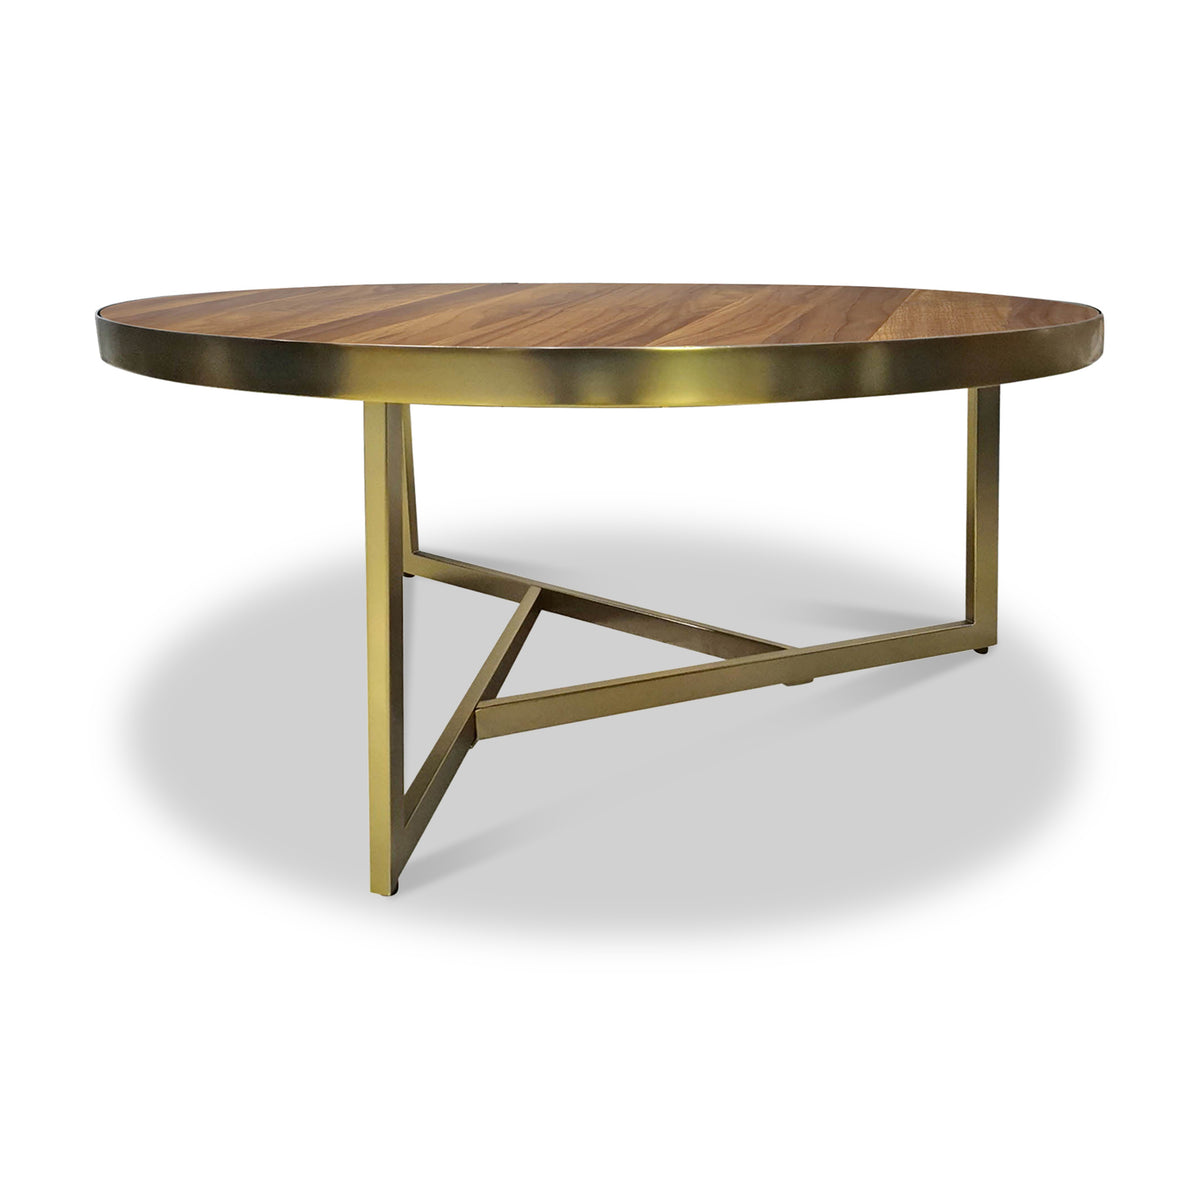 Alfreton Round Coffee Table from Roseland Furniture